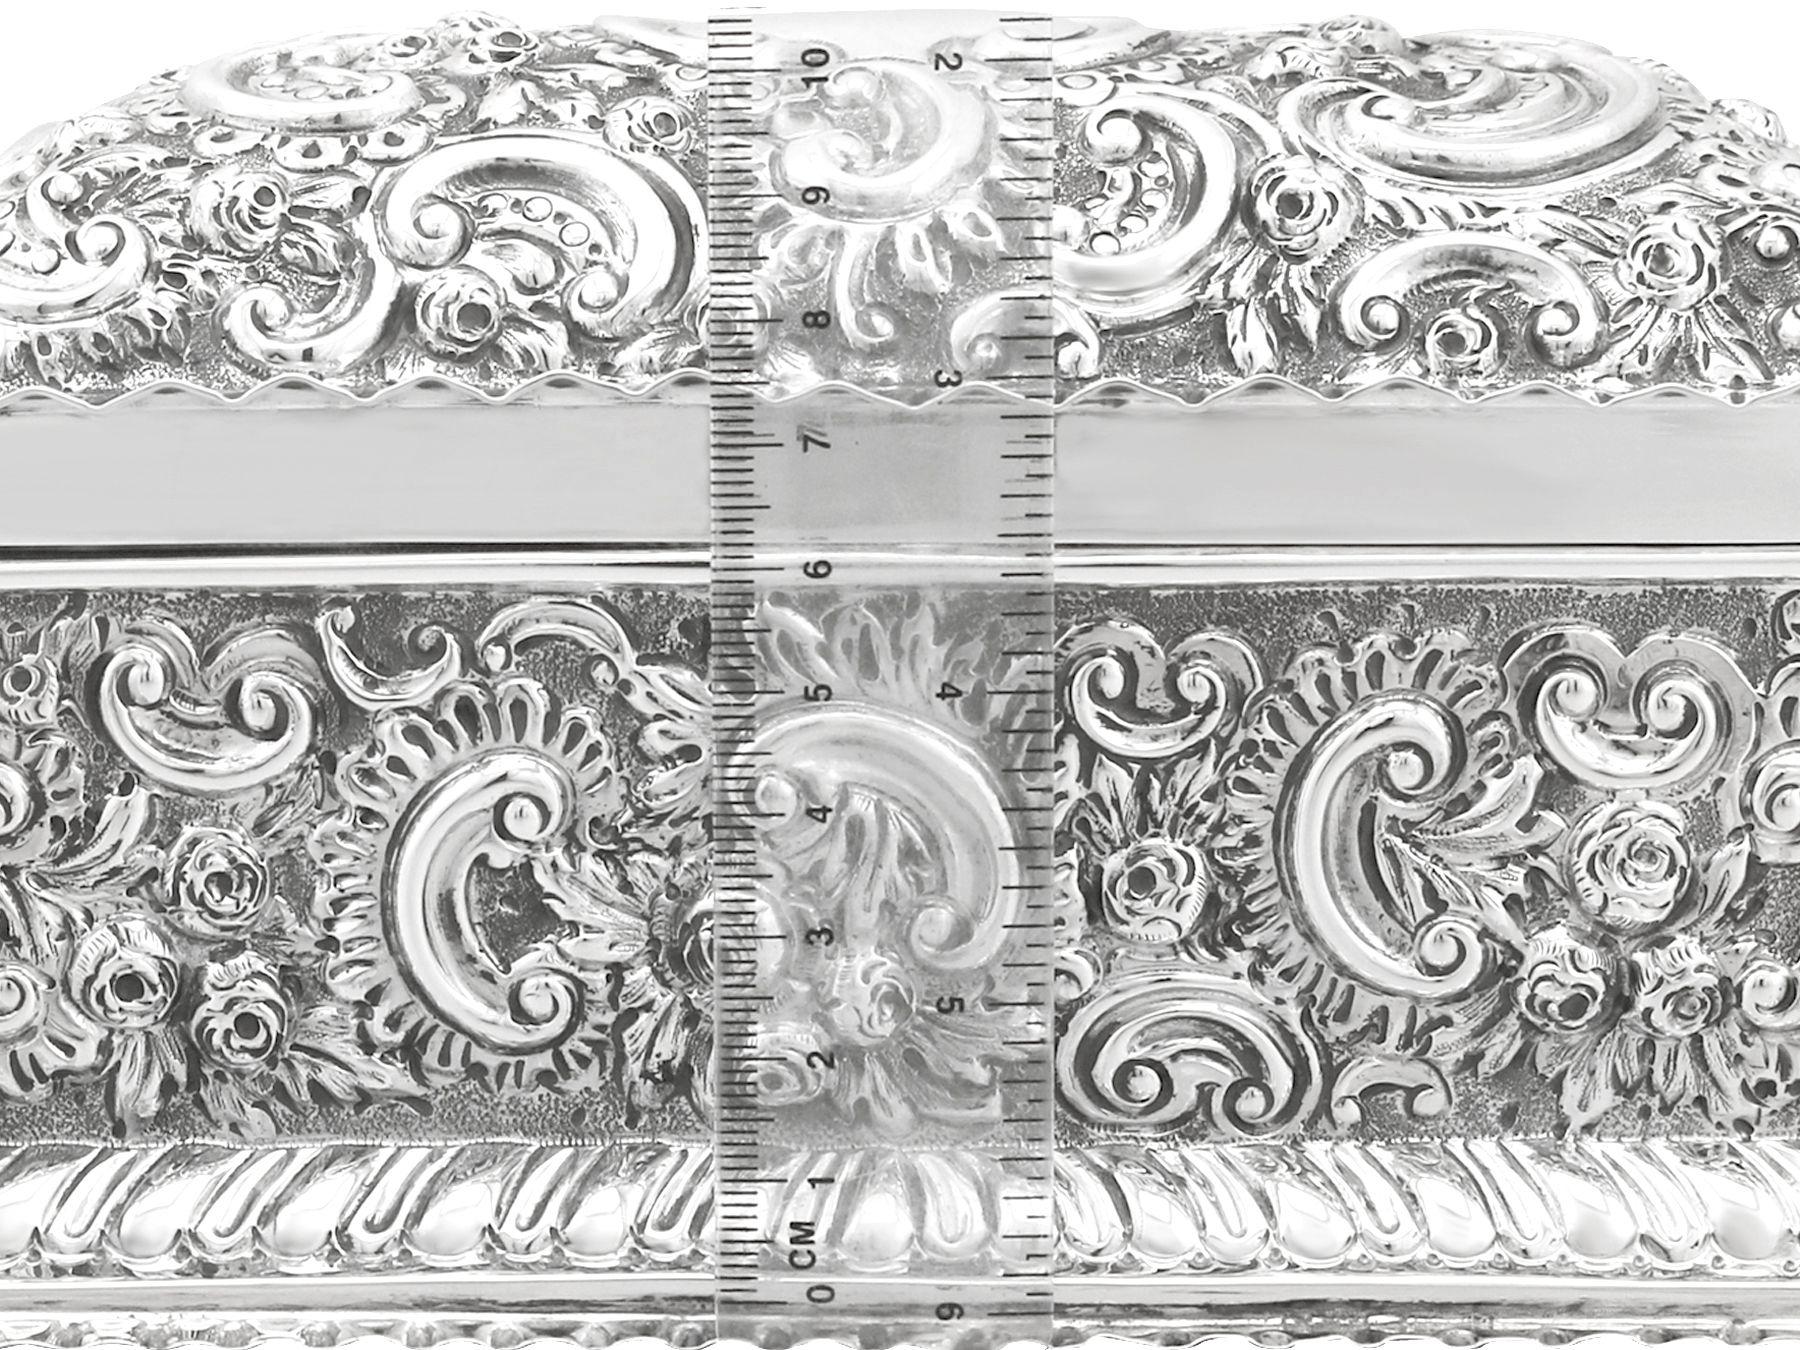 Late 19th Century 19th Century Victorian English Sterling Silver Jewelry Casket